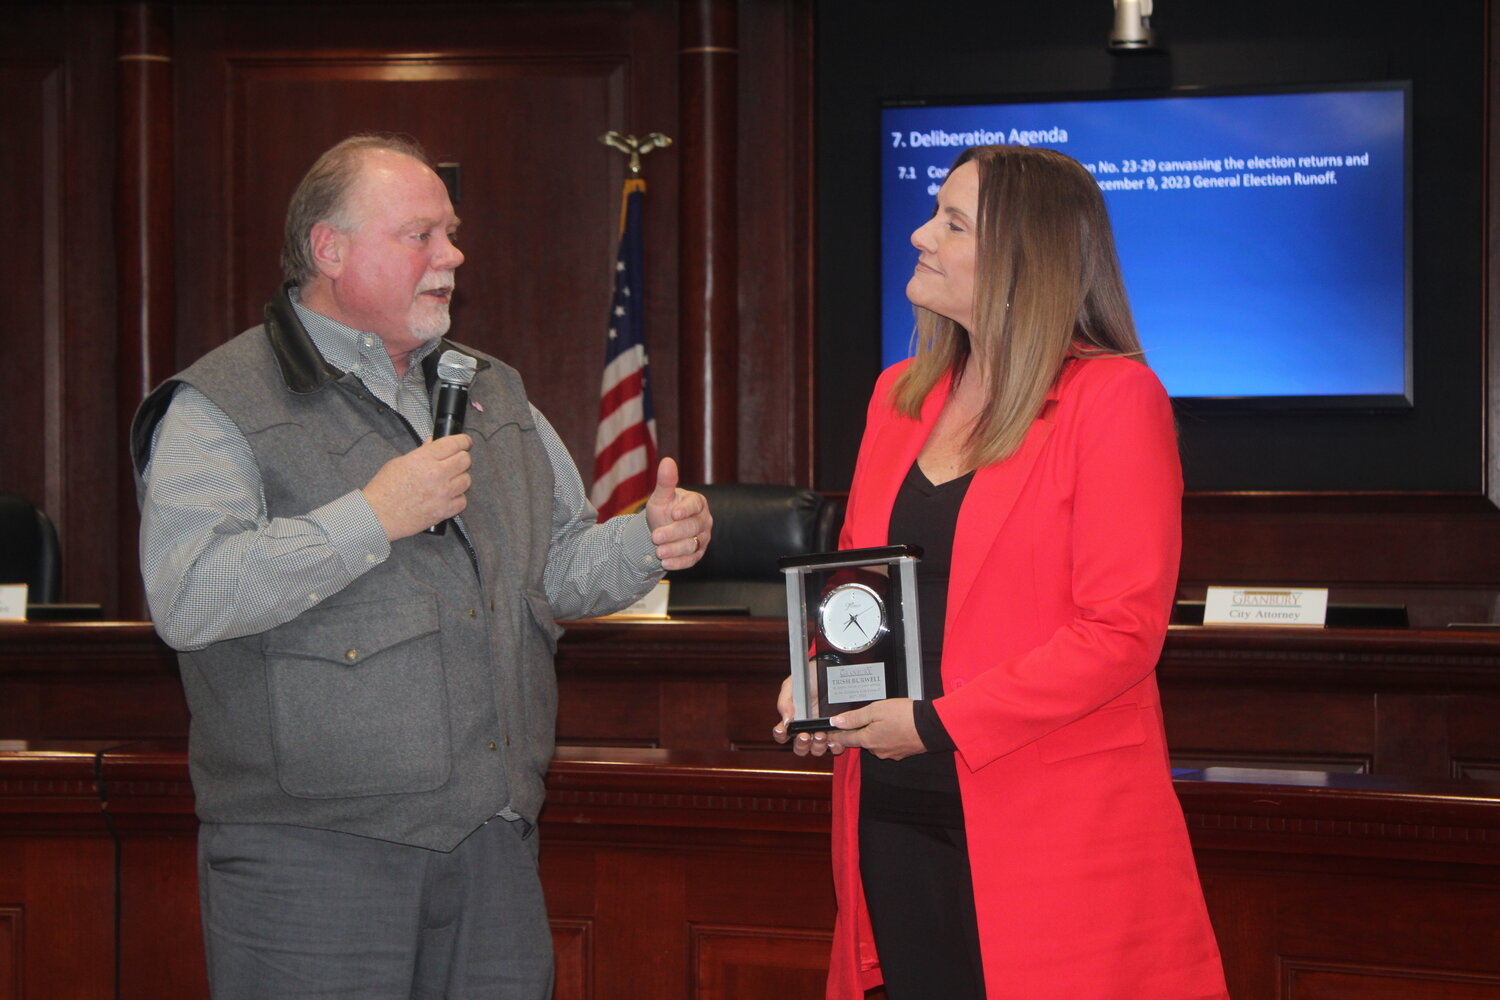 Mayor Pro Tem Trish Burwell receives a clock from City Manager Chris Coffman as she steps down as a city council member during a regular meeting of the Granbury City Council on Dec. 19.